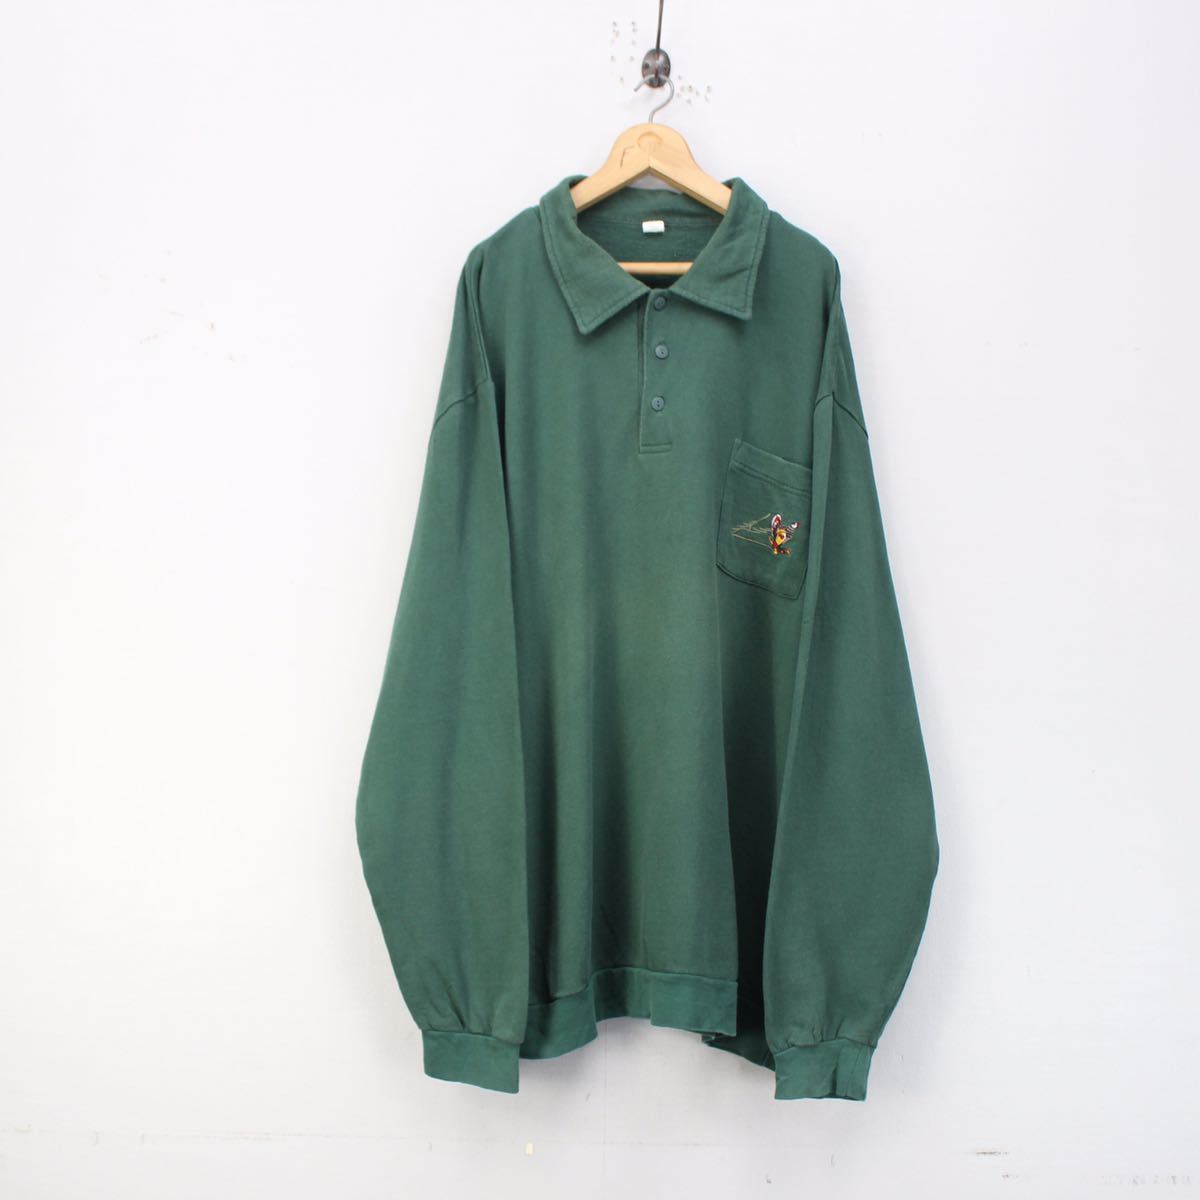 USA VINTAGE PEECOCK EMBROIDERY SWEAT POLO SHIRT/アメリカ古着孔雀刺繍スウェットポロシャツ_画像4